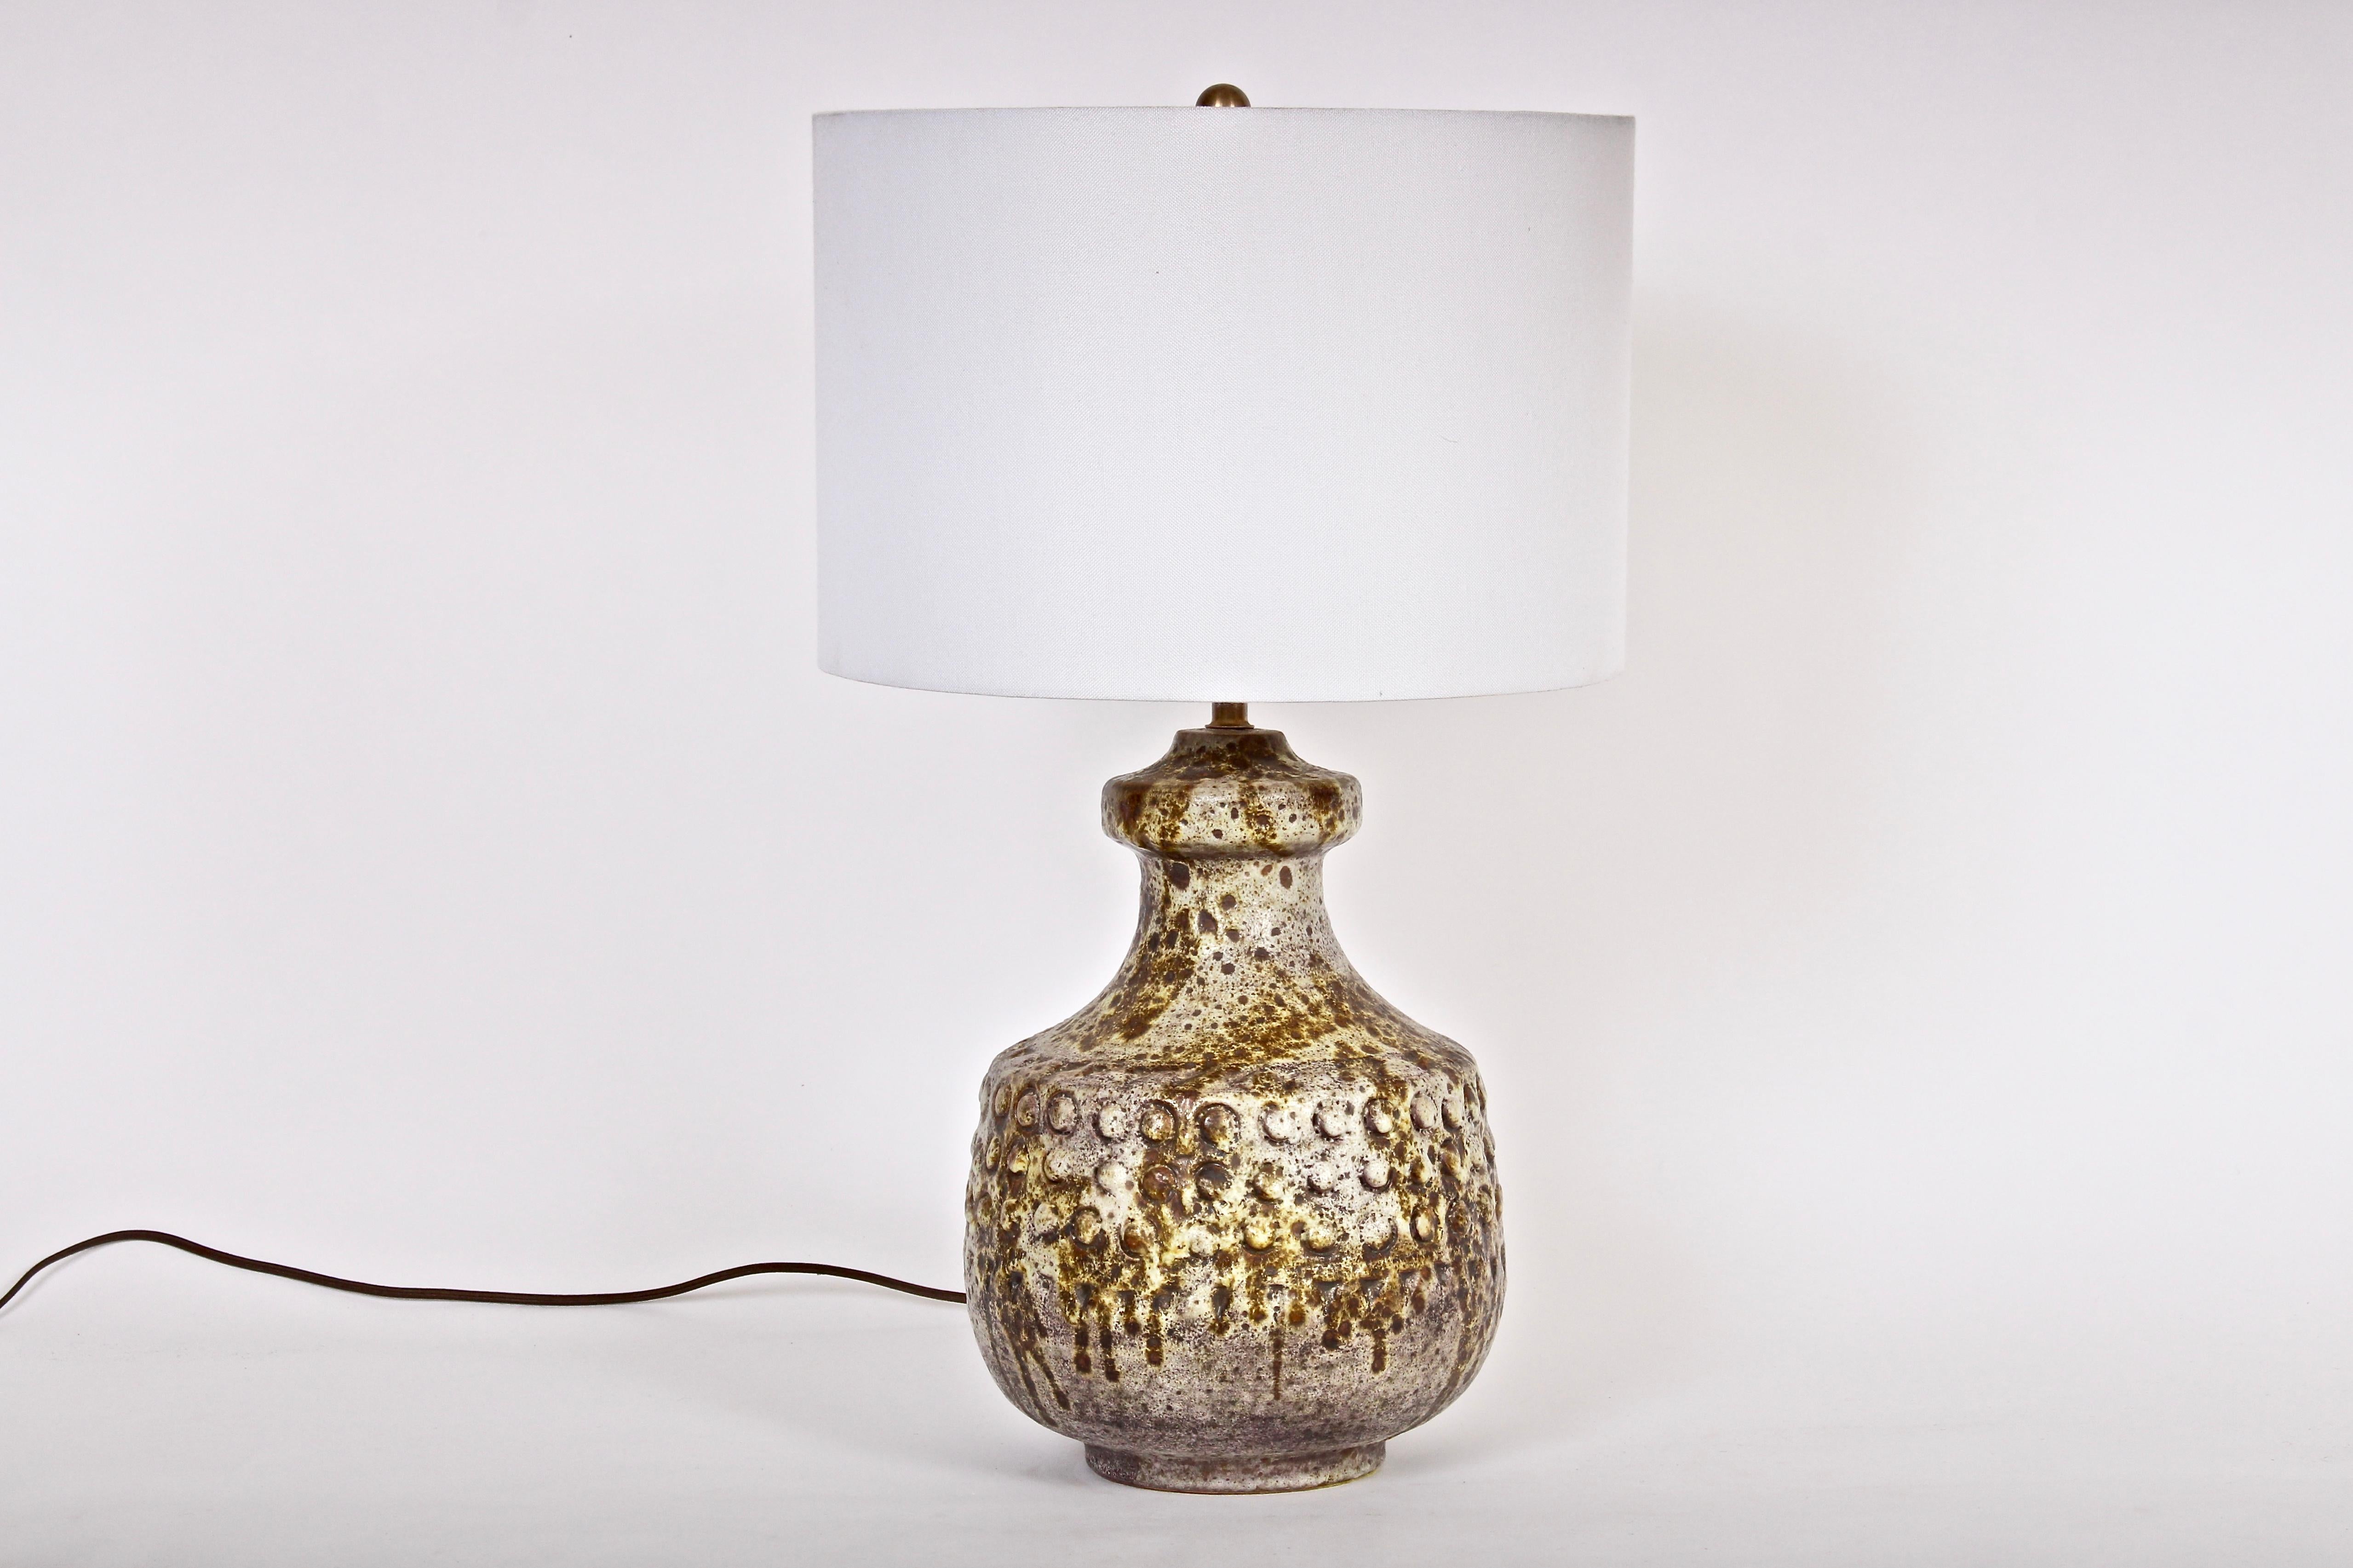 Italian Modern Alvino Bagni textured bright earthen drip glazed ceramic bedside lamp. Featuring a three dimensional handcrafted squat body with raised button accents. With speckled and reflective coloration in beige, white, brown, coffee and pale